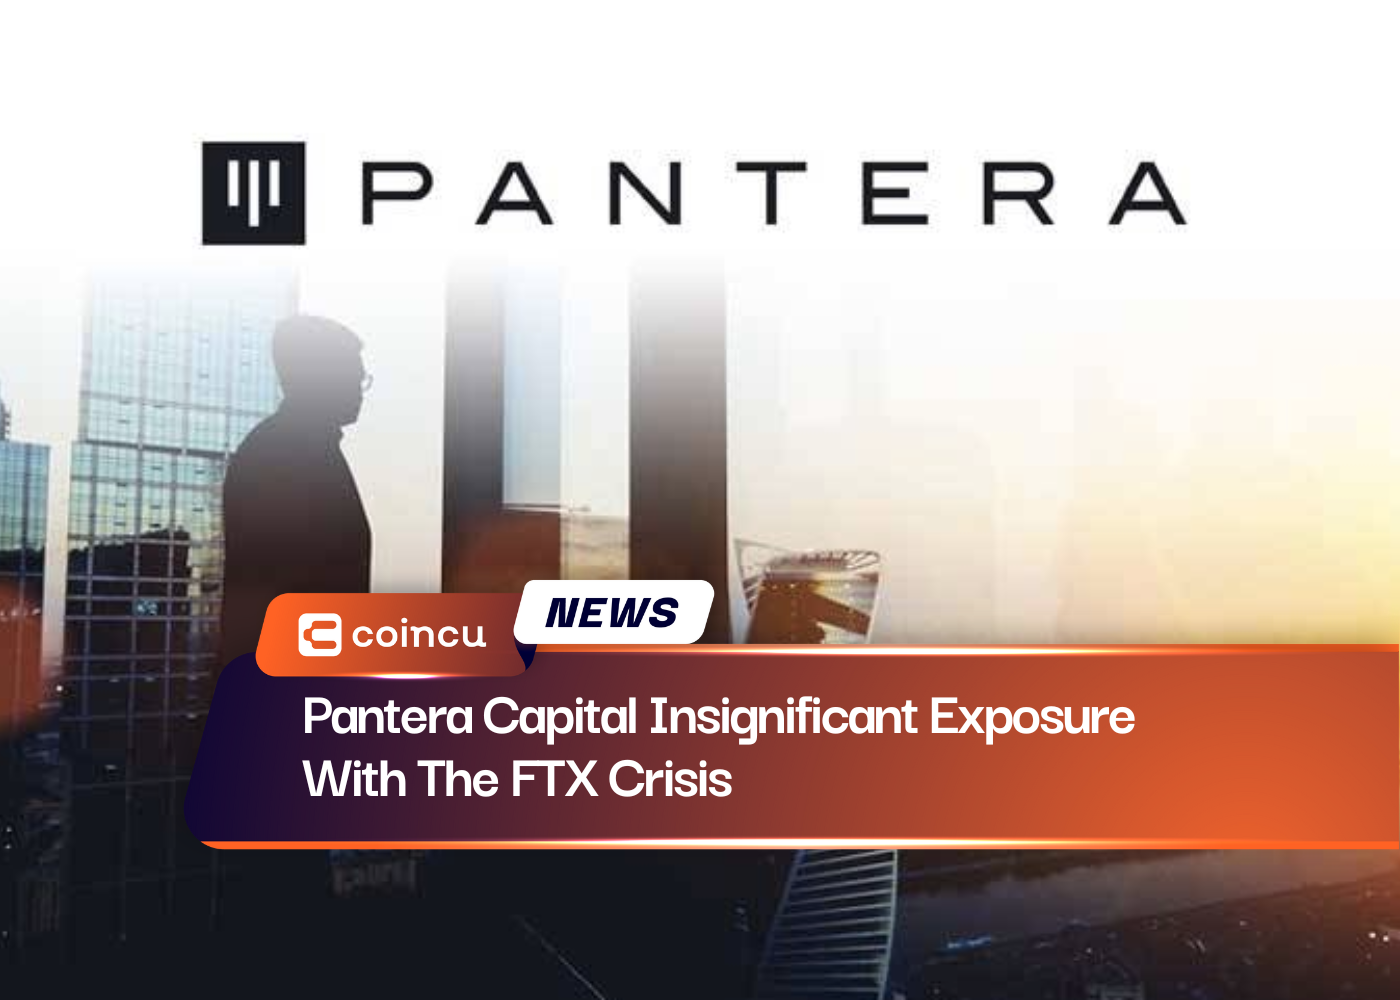 Pantera Capital Insignificant Exposure With The FTX Crisis